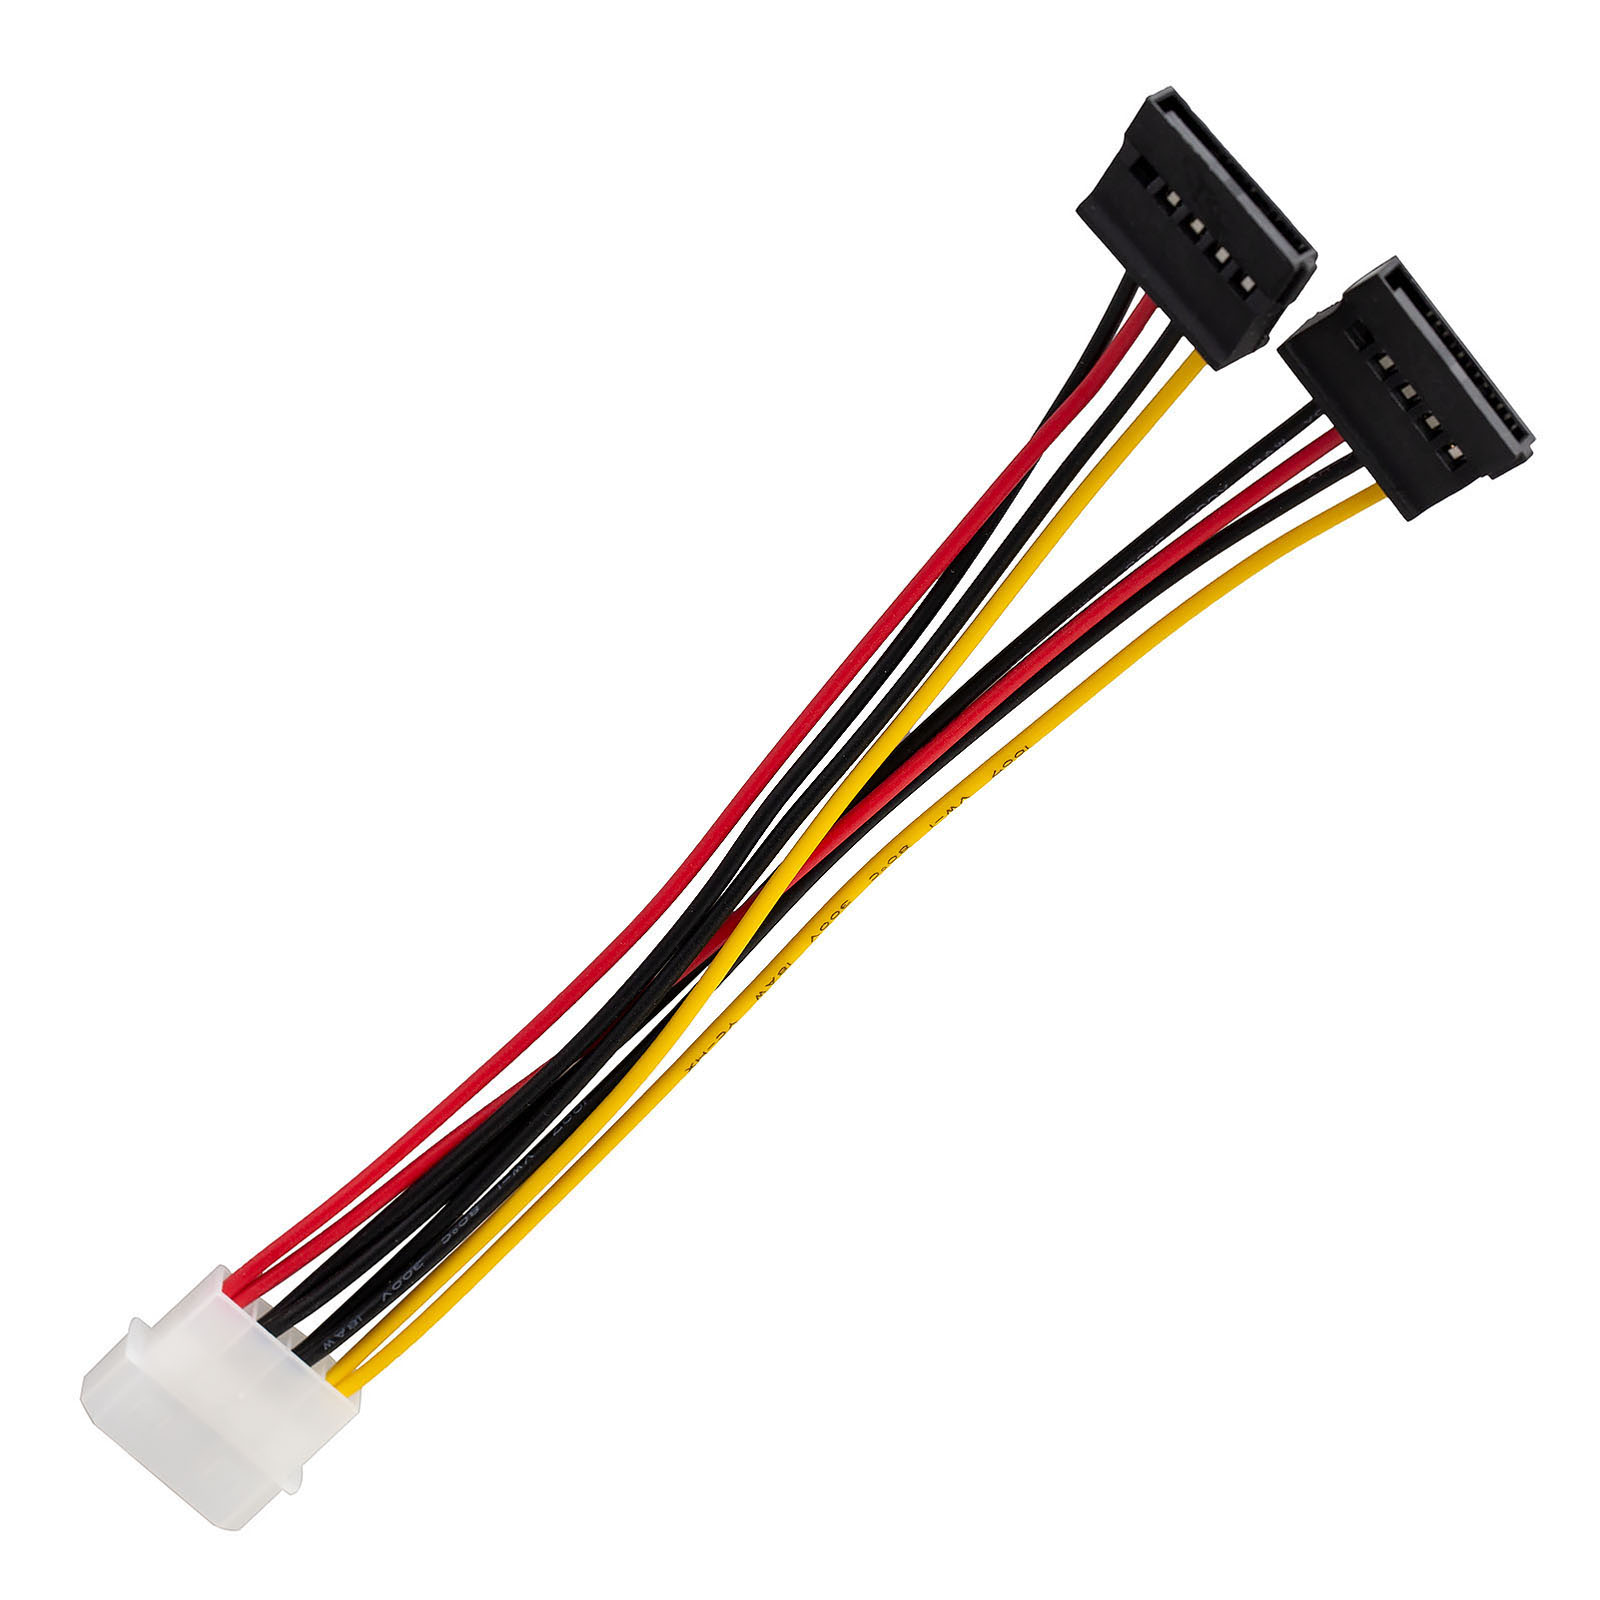 4 Pin Ide Male To 2 Sata Female Power Split Cable For Dual Hard Drive 0958